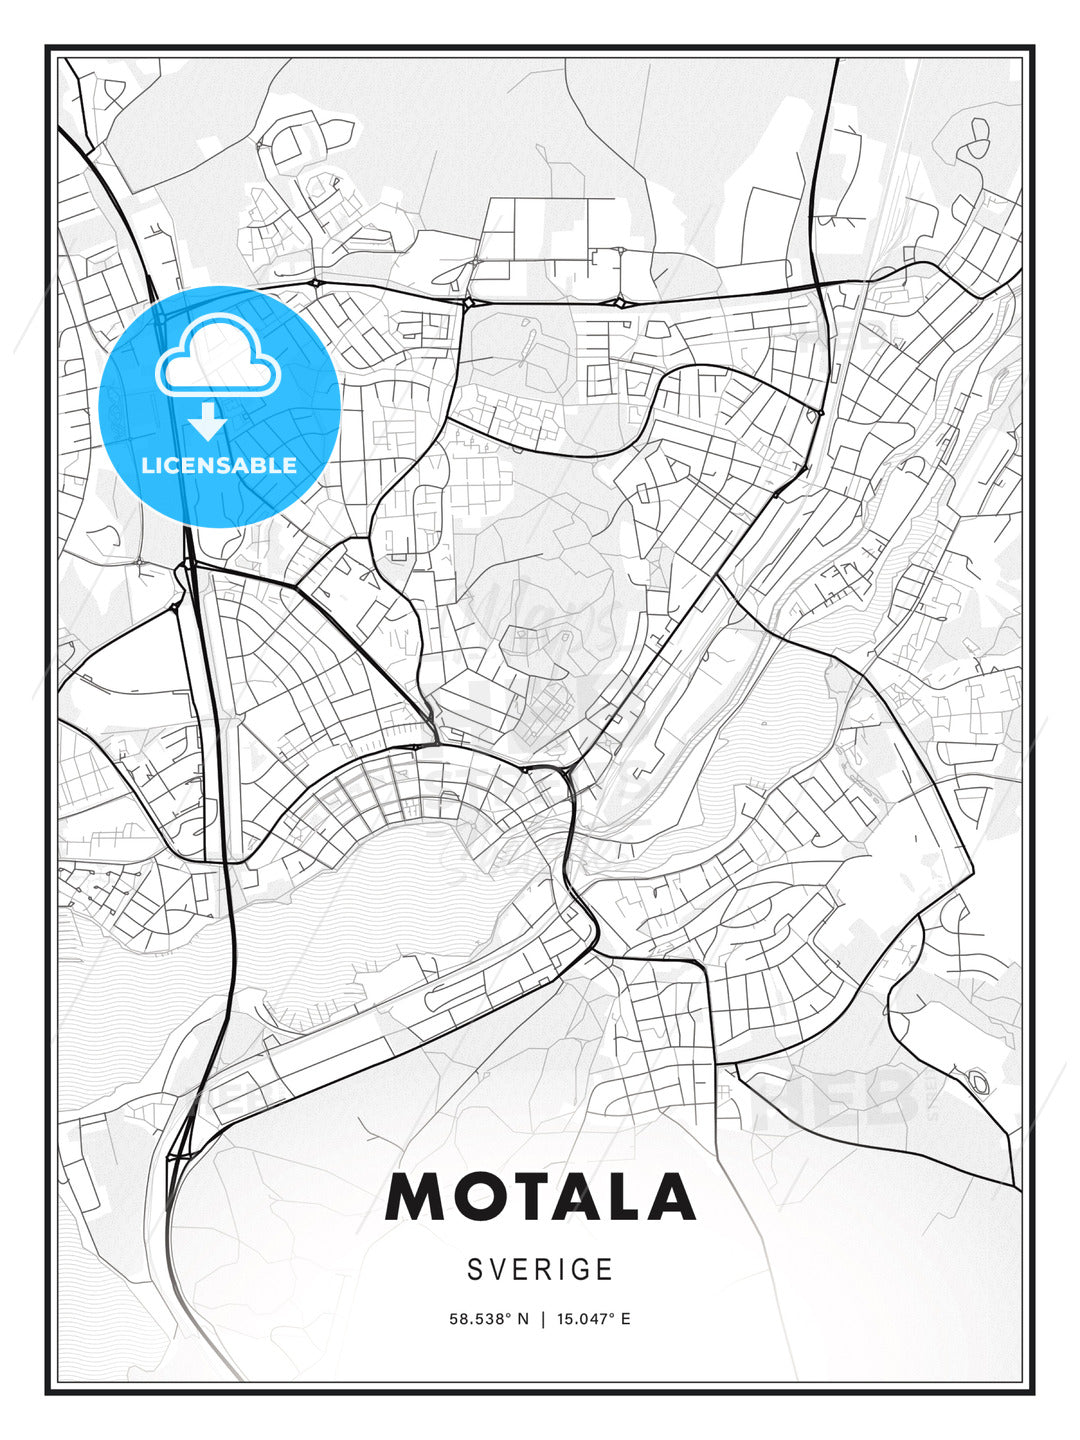 Motala, Sweden, Modern Print Template in Various Formats - HEBSTREITS Sketches